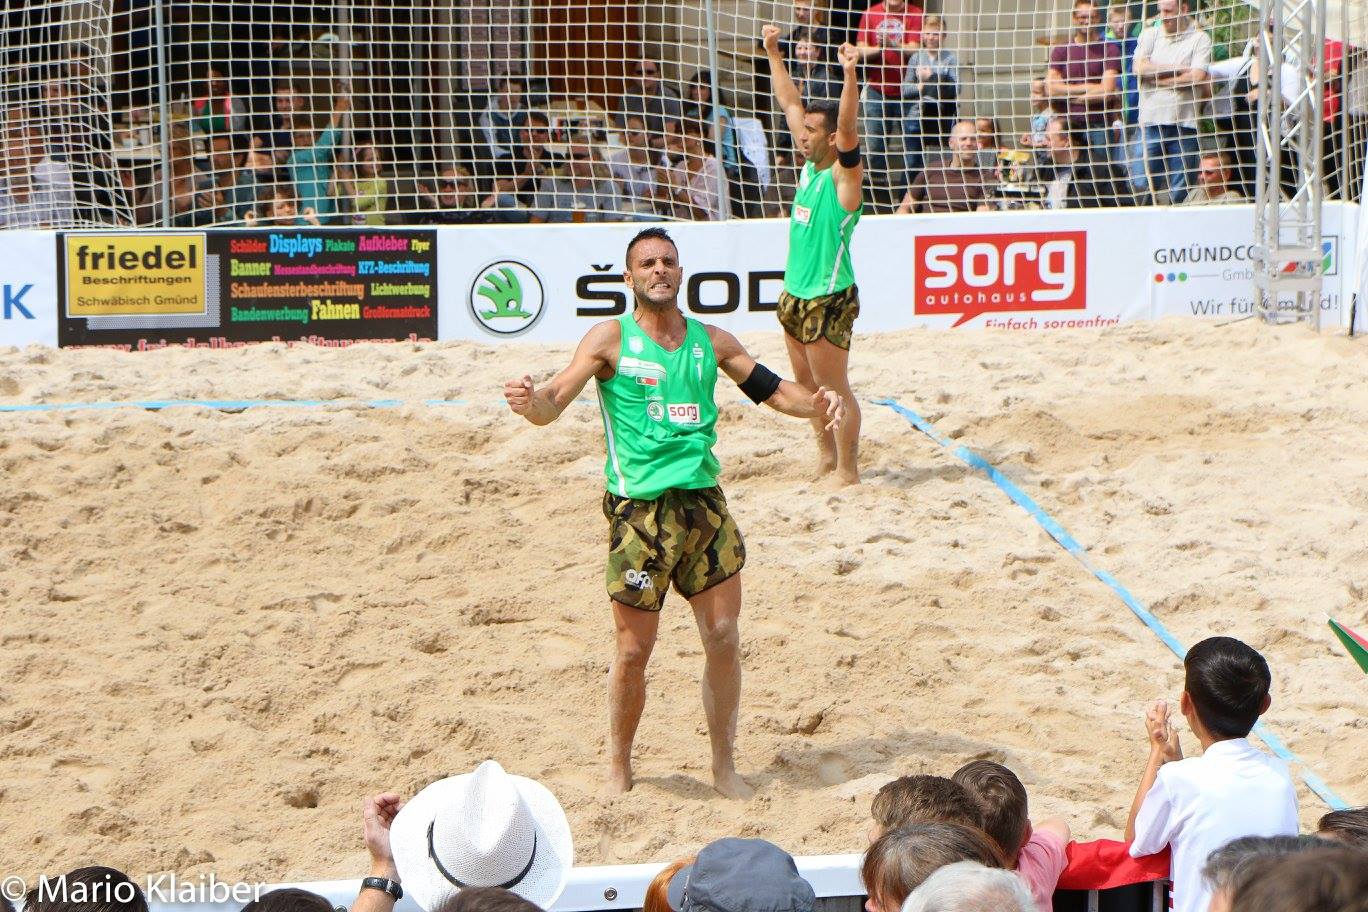 I European Footvolley Championship - Germany 2016 will feature the presence of two Portuguese teams